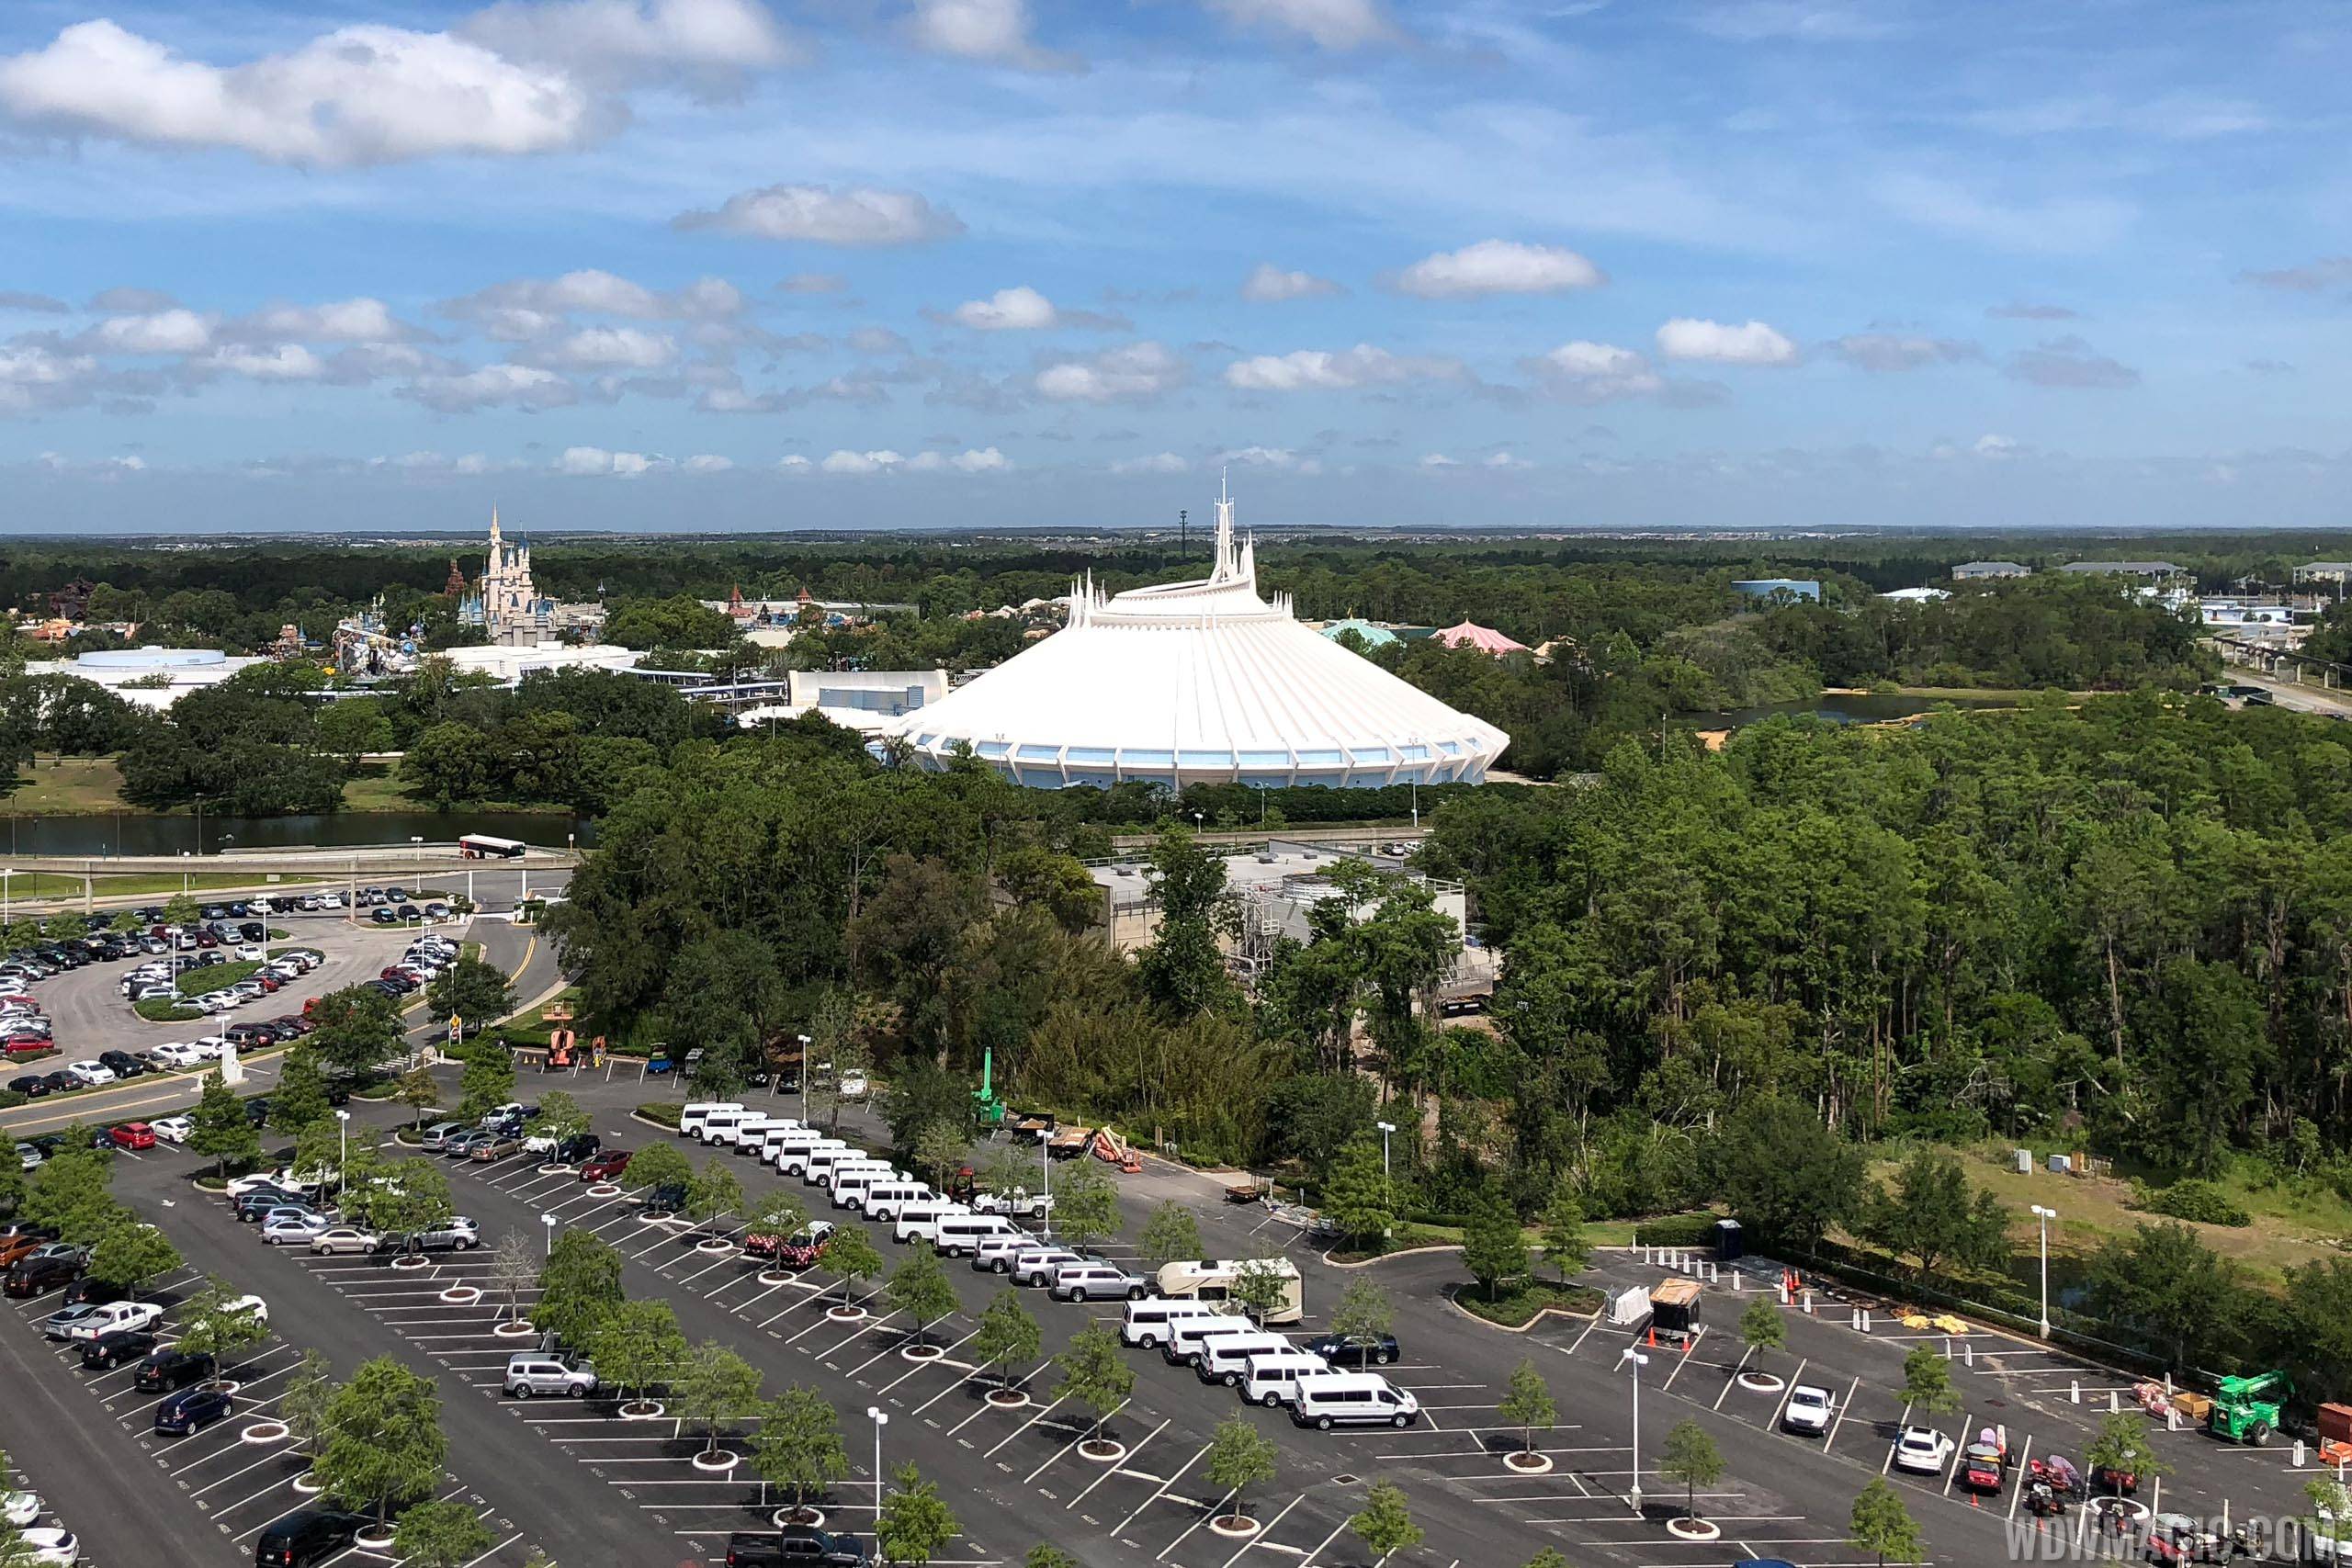 PHOTOS - A look at ground preparation for Tron at the Magic Kingdom